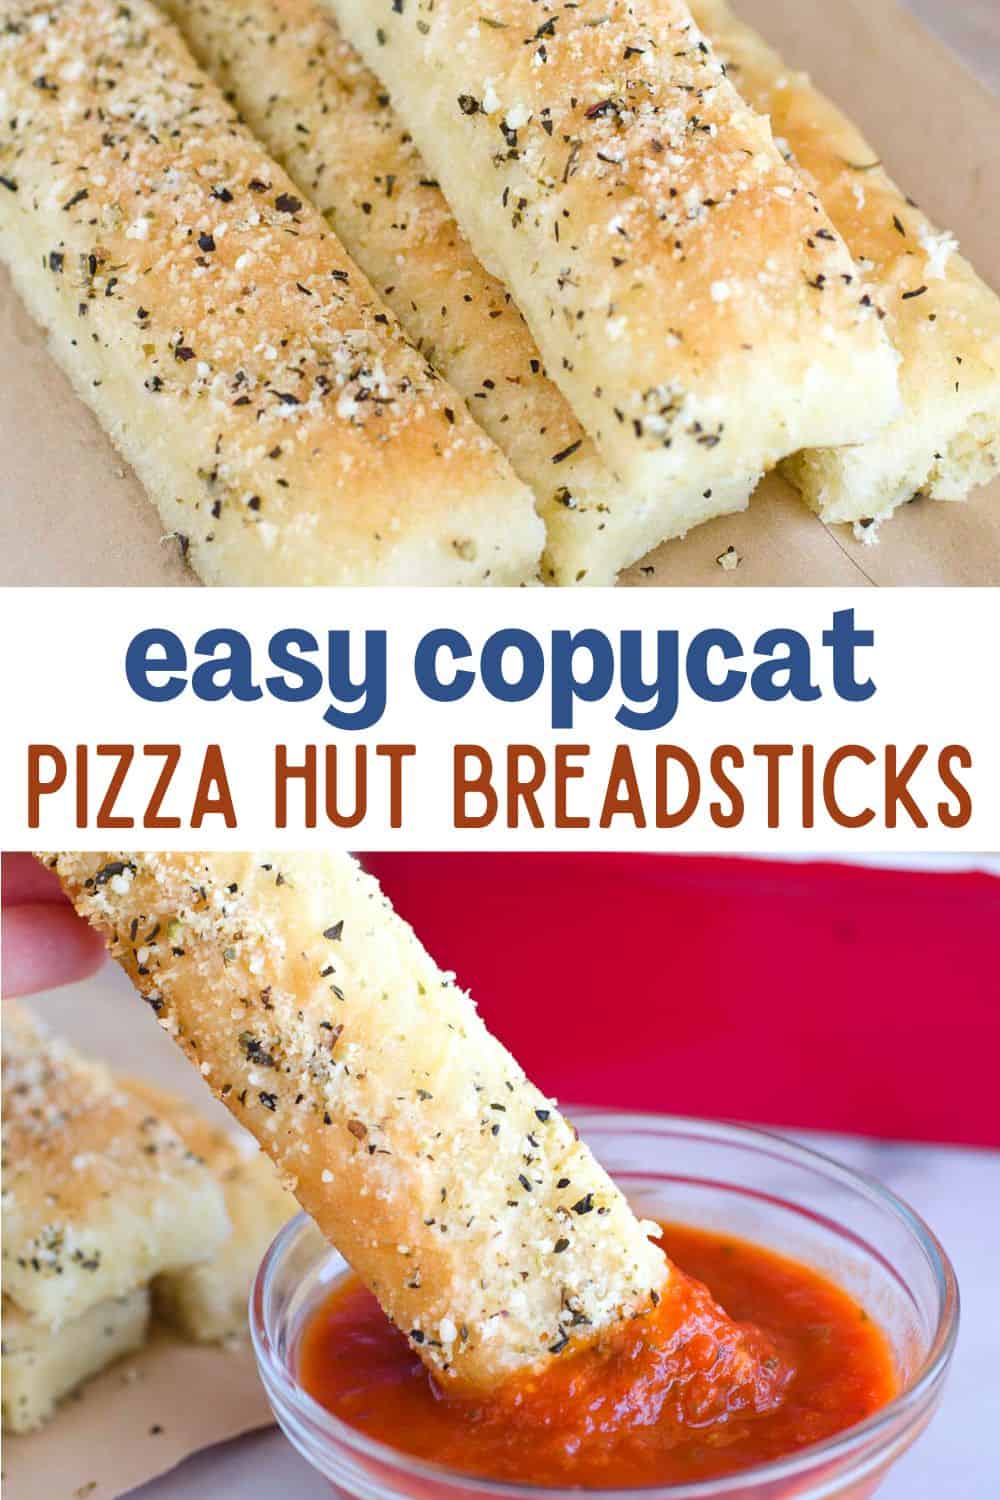 These homemade breadsticks are labeled by my family as "Better Than Pizza Hut Breadsticks". We love Pizza Hut breadsticks, but this easy copycat recipe steps it up a notch and is ALWAYS fresh out of the oven!